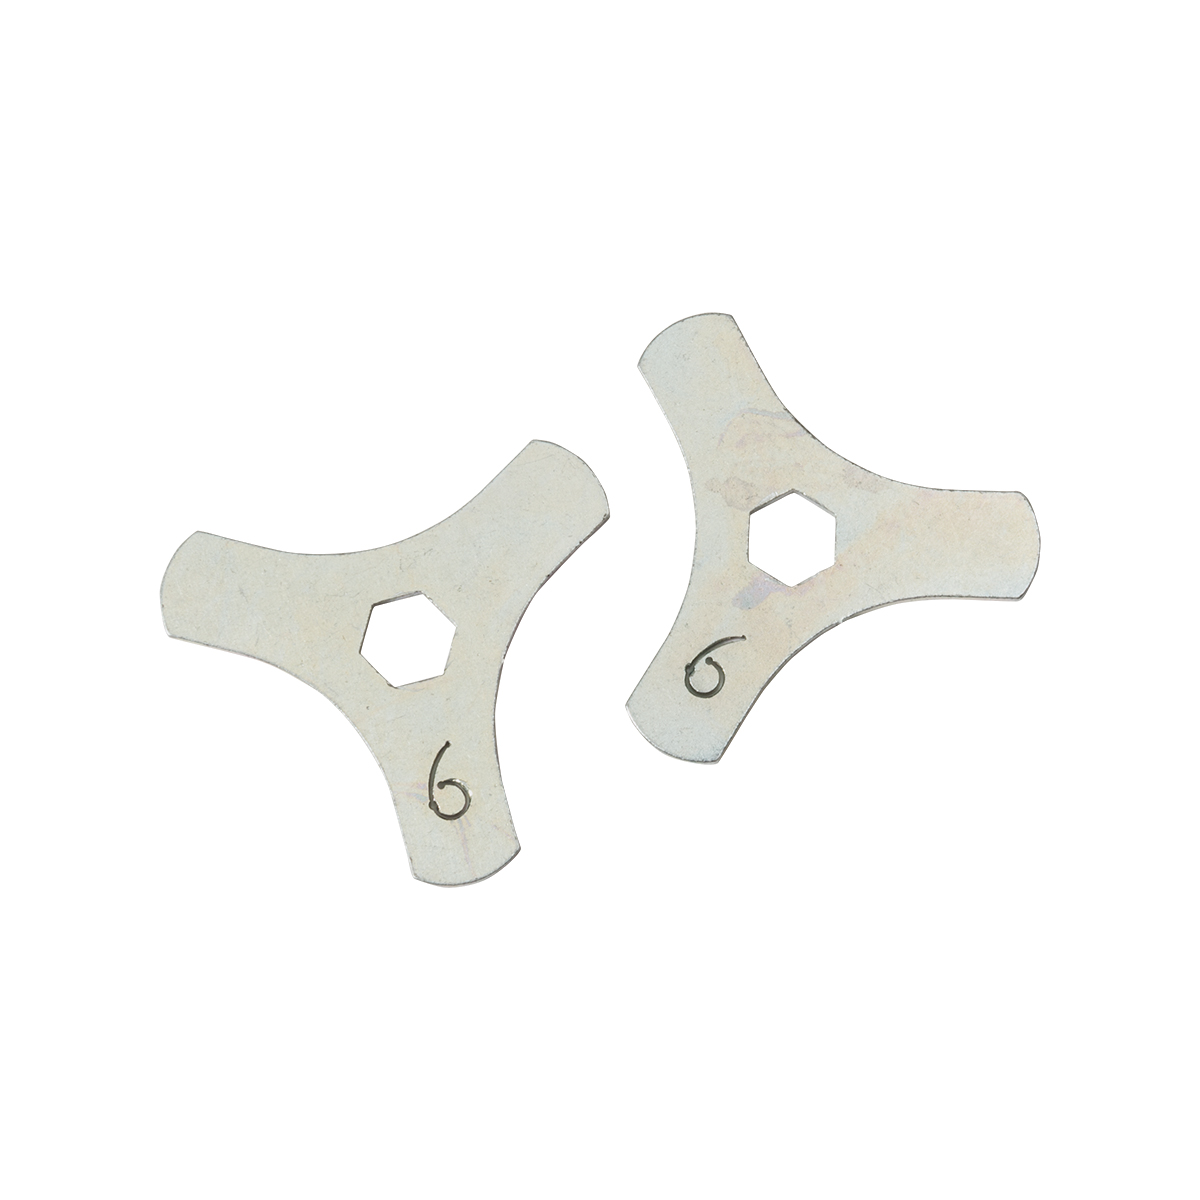 CAM® Set - Size 6 (Pack of 2)